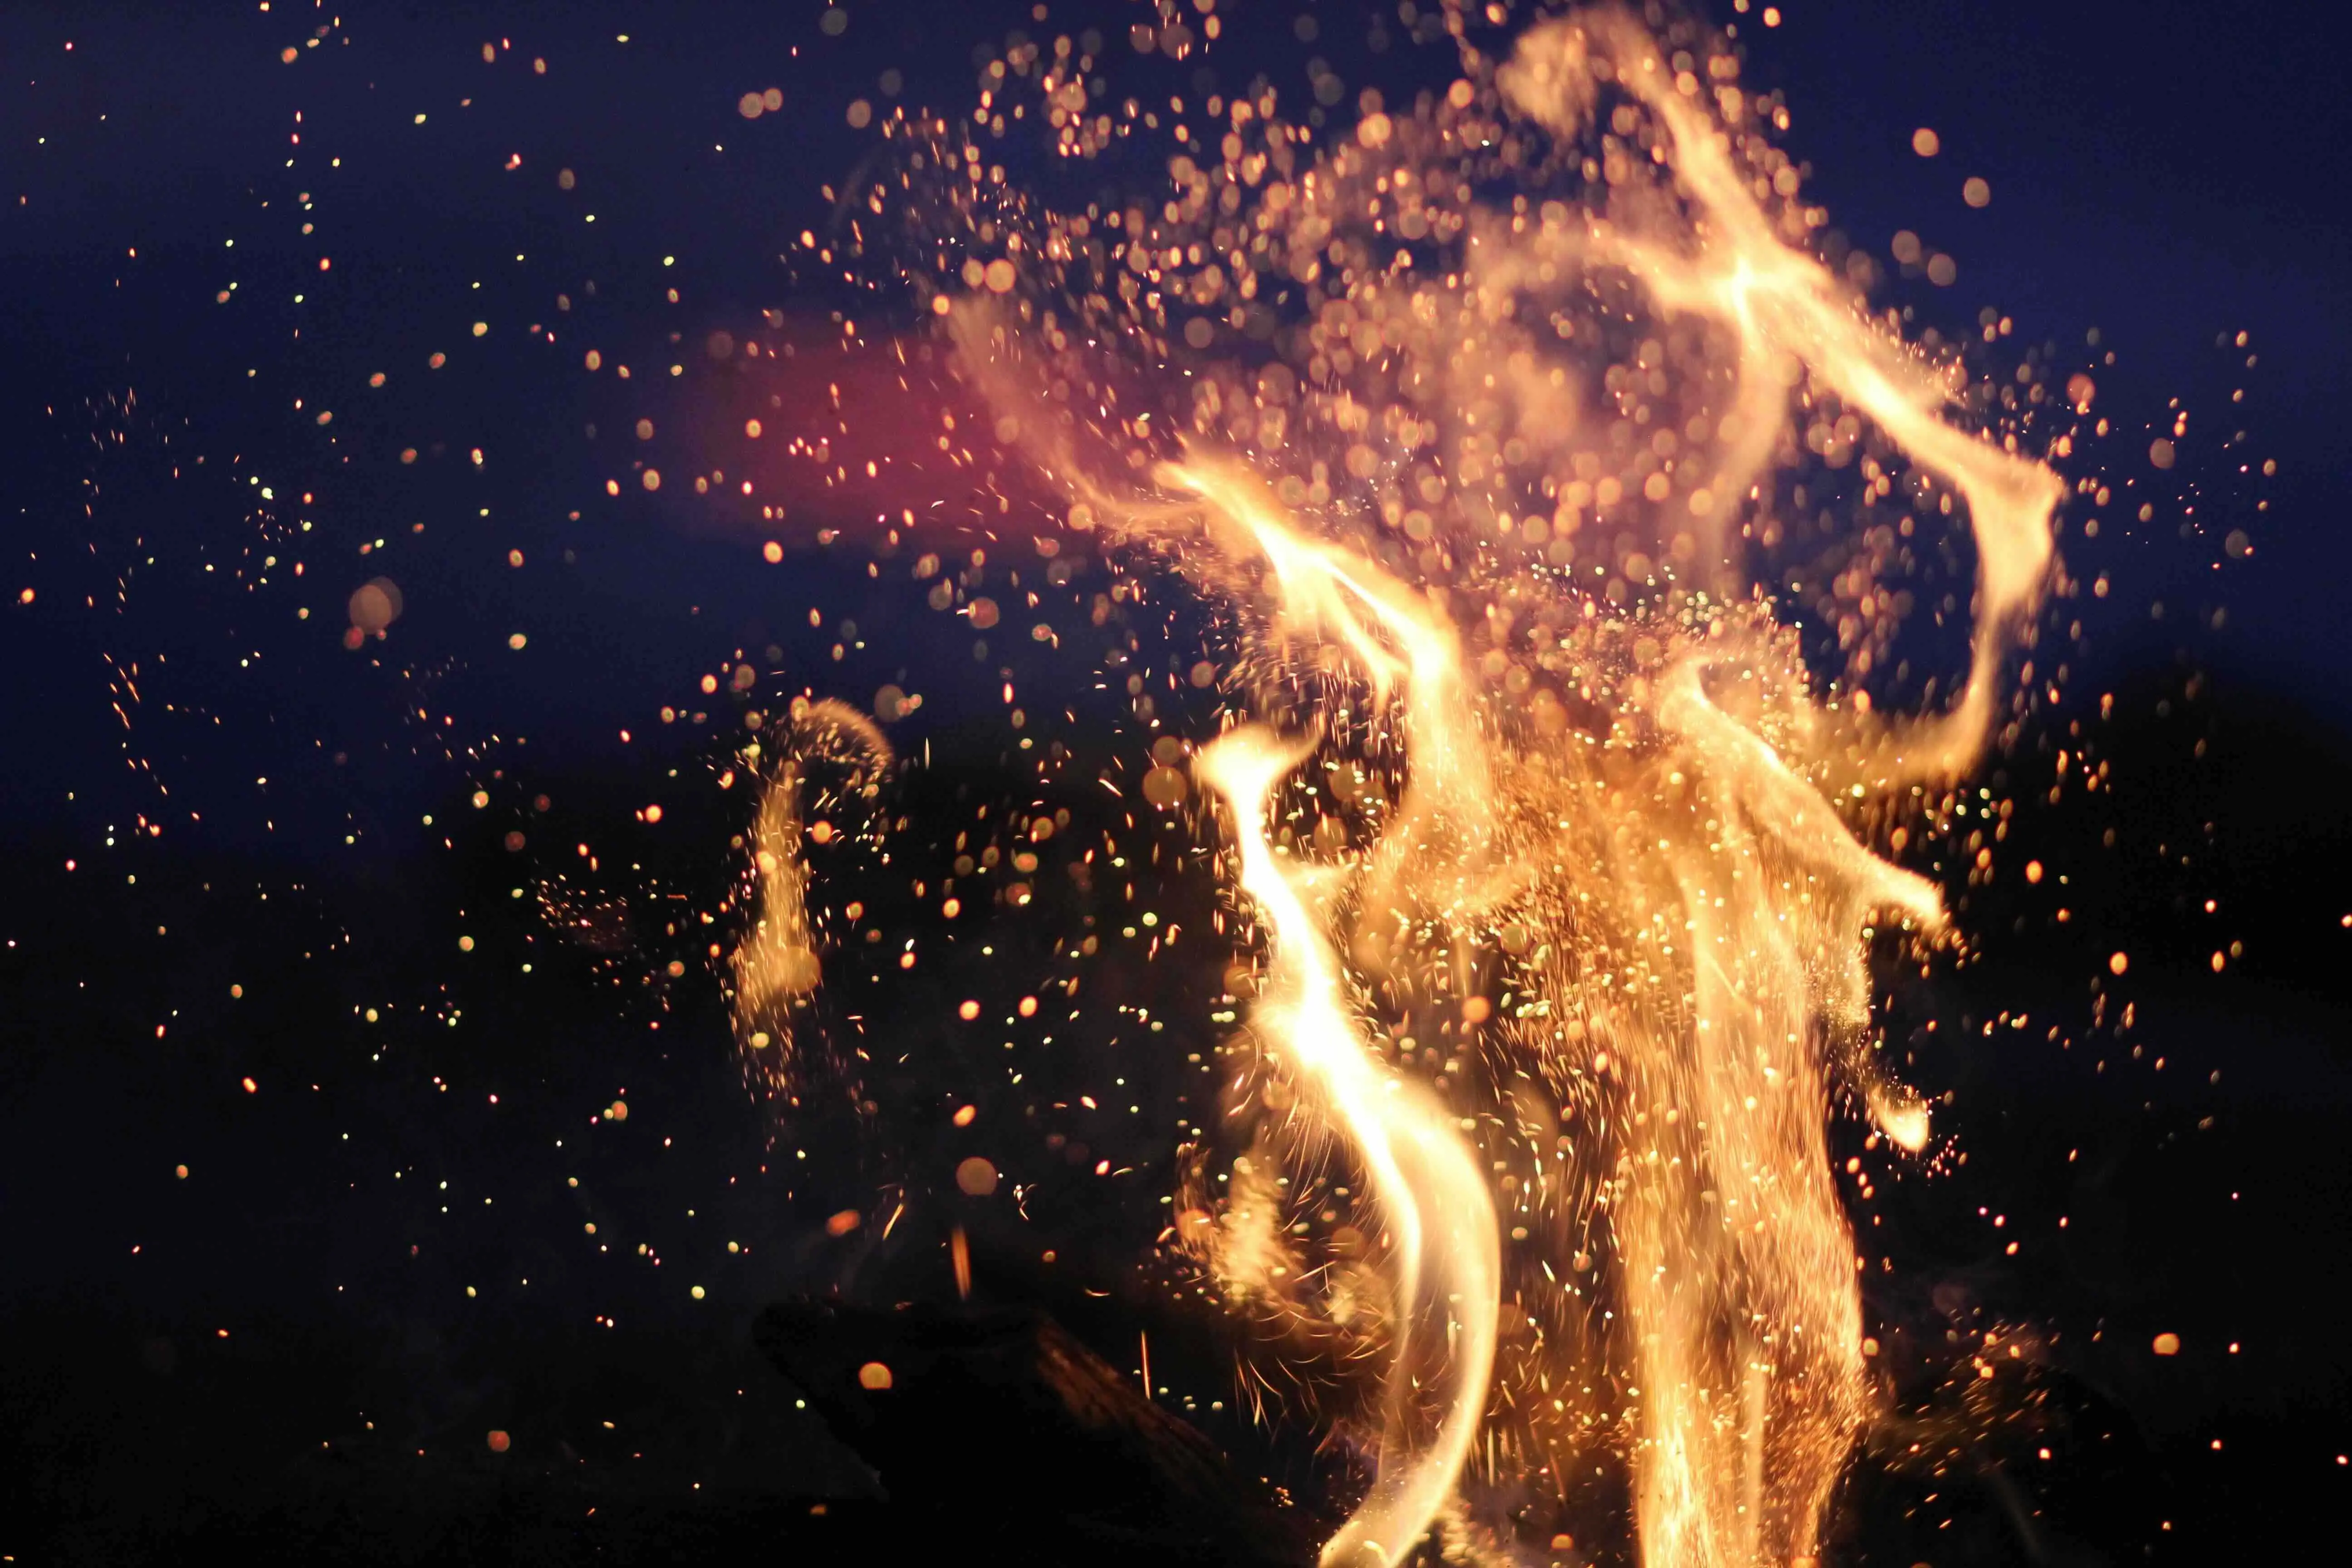 Flames and sparks against a dark background